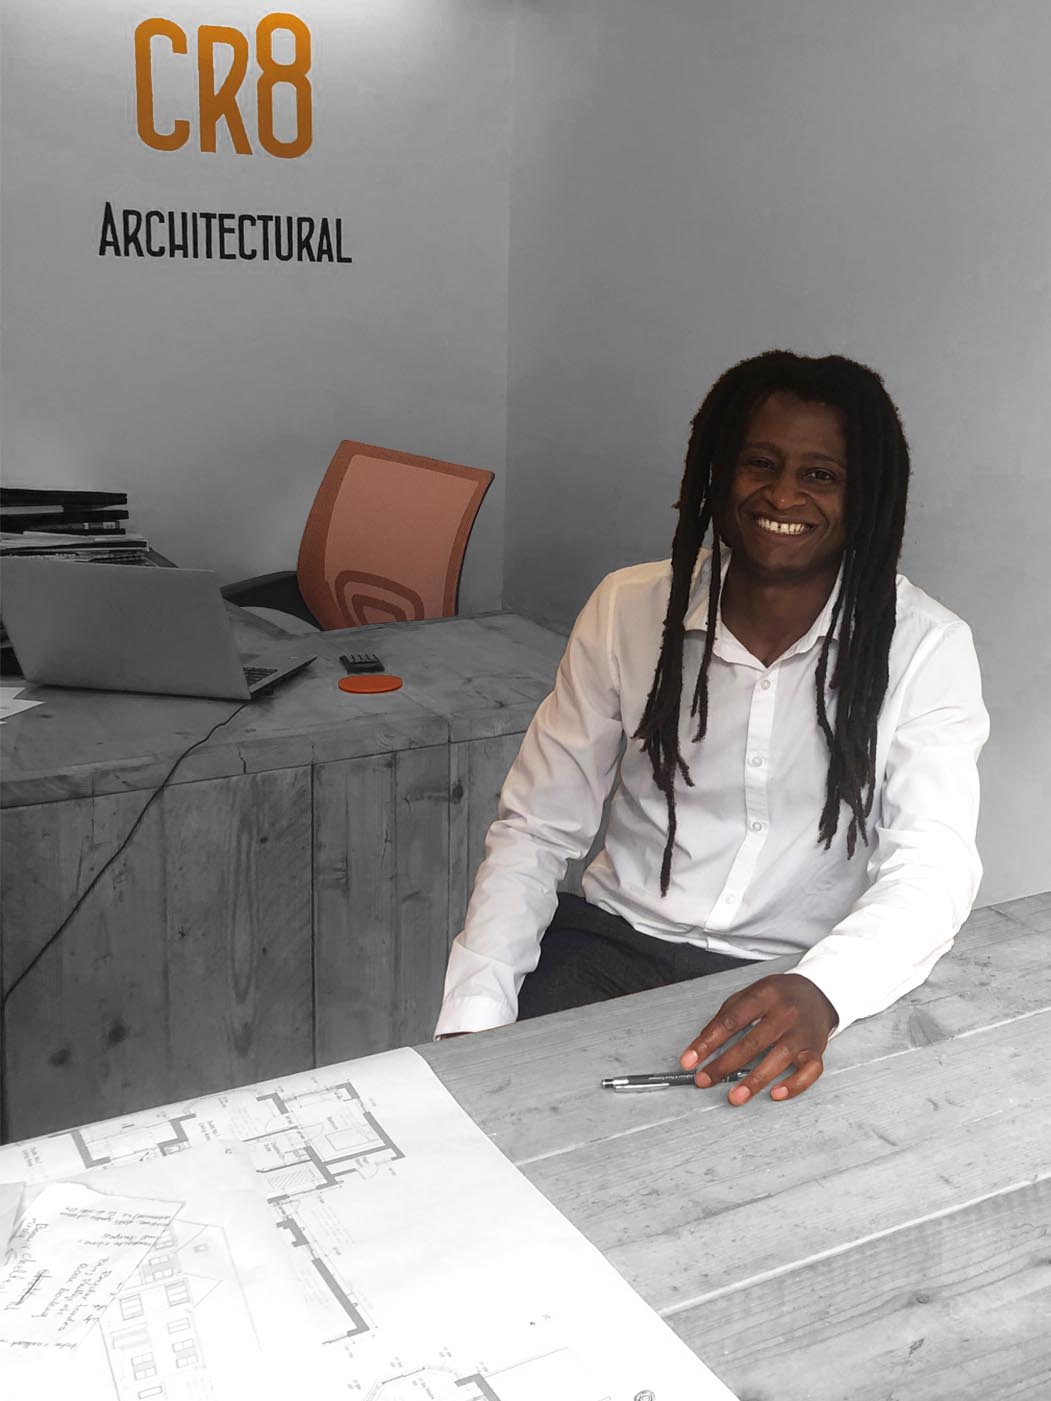 Richard Todd CR8 Architectural Founder and Leading Architect Design and Planning